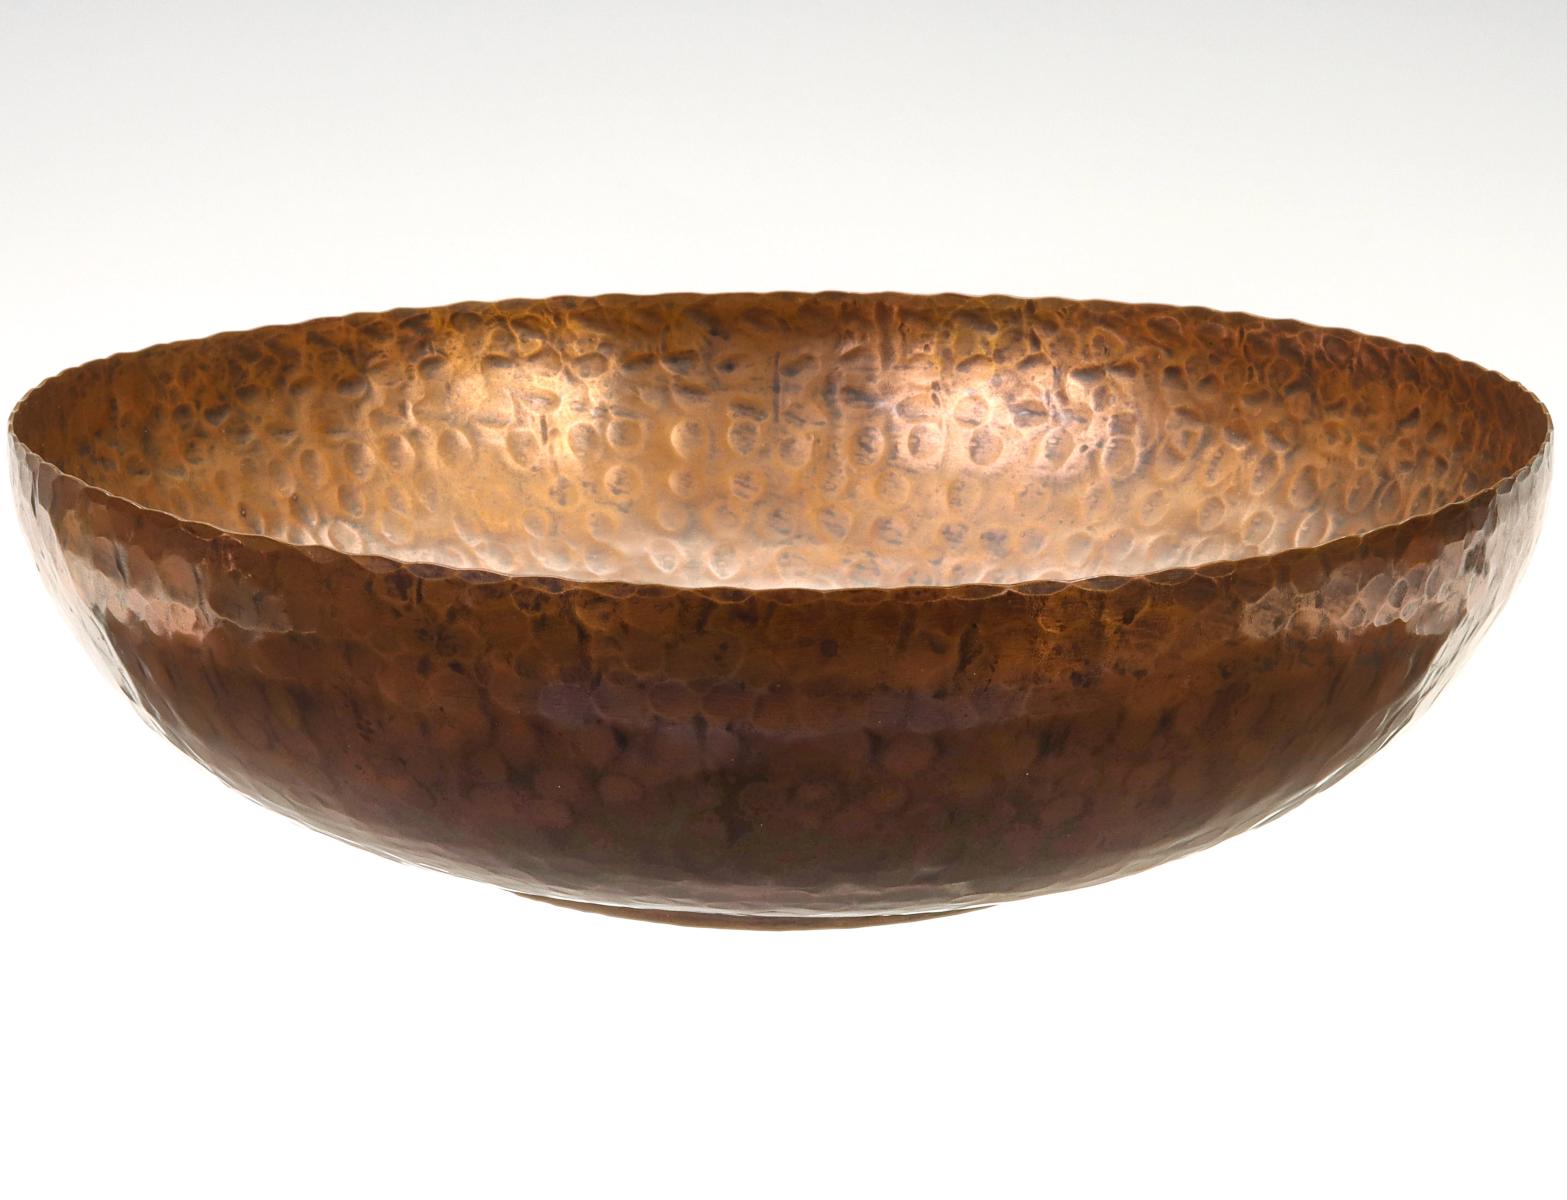 A LARGE HAMMERED COPPER BASIN SIGNED HARRY DIXON